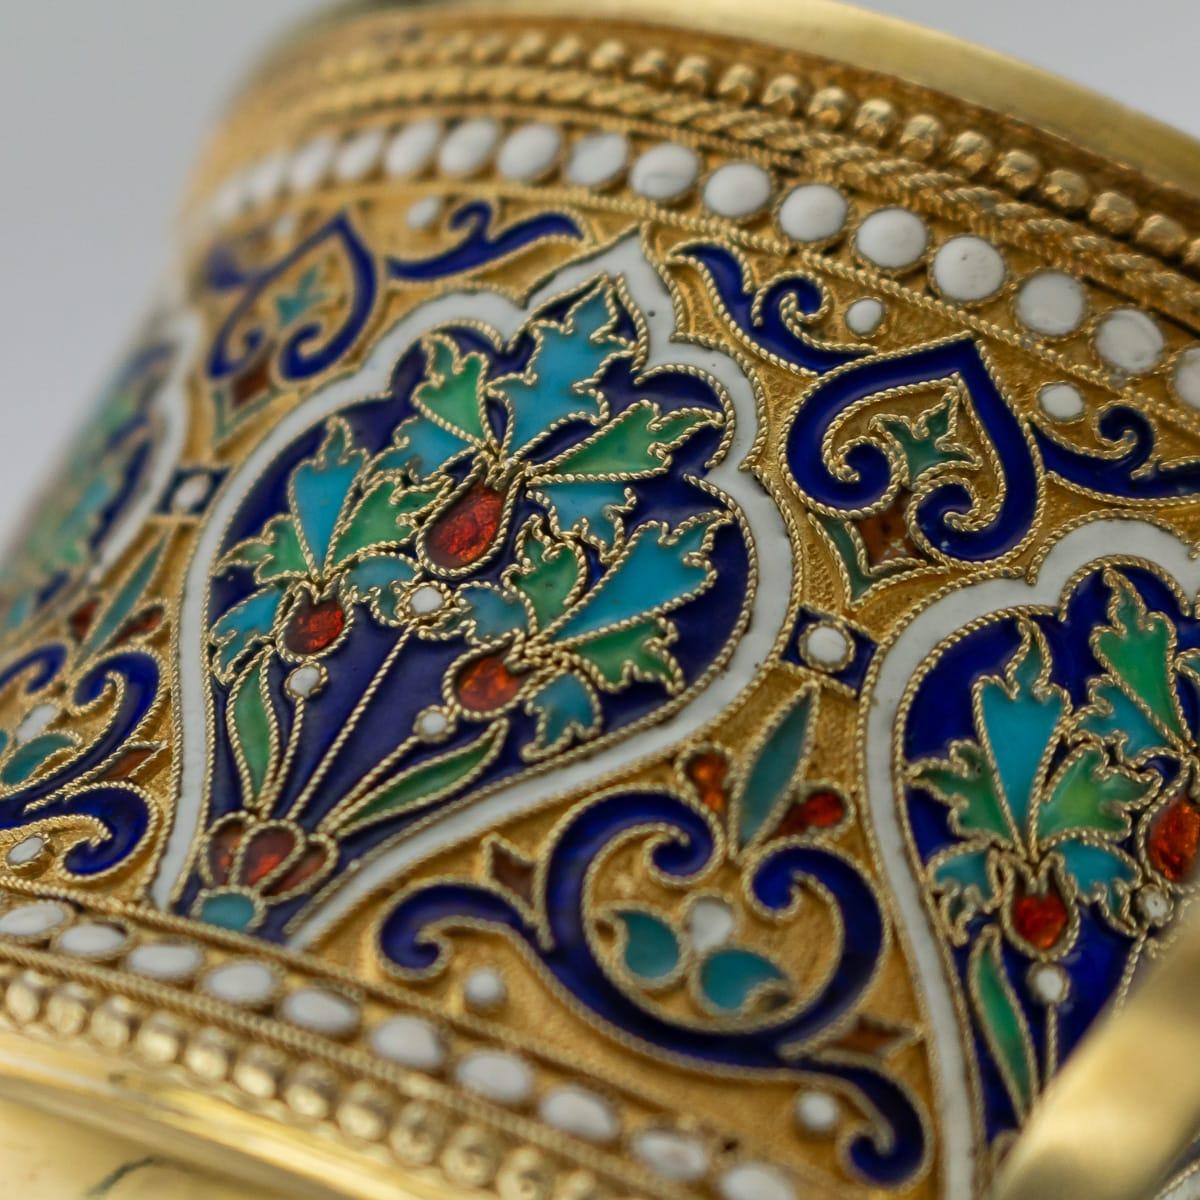 19th Century Imperial Russian Solid Silver-Gilt and Enamel Cup on Saucer 4